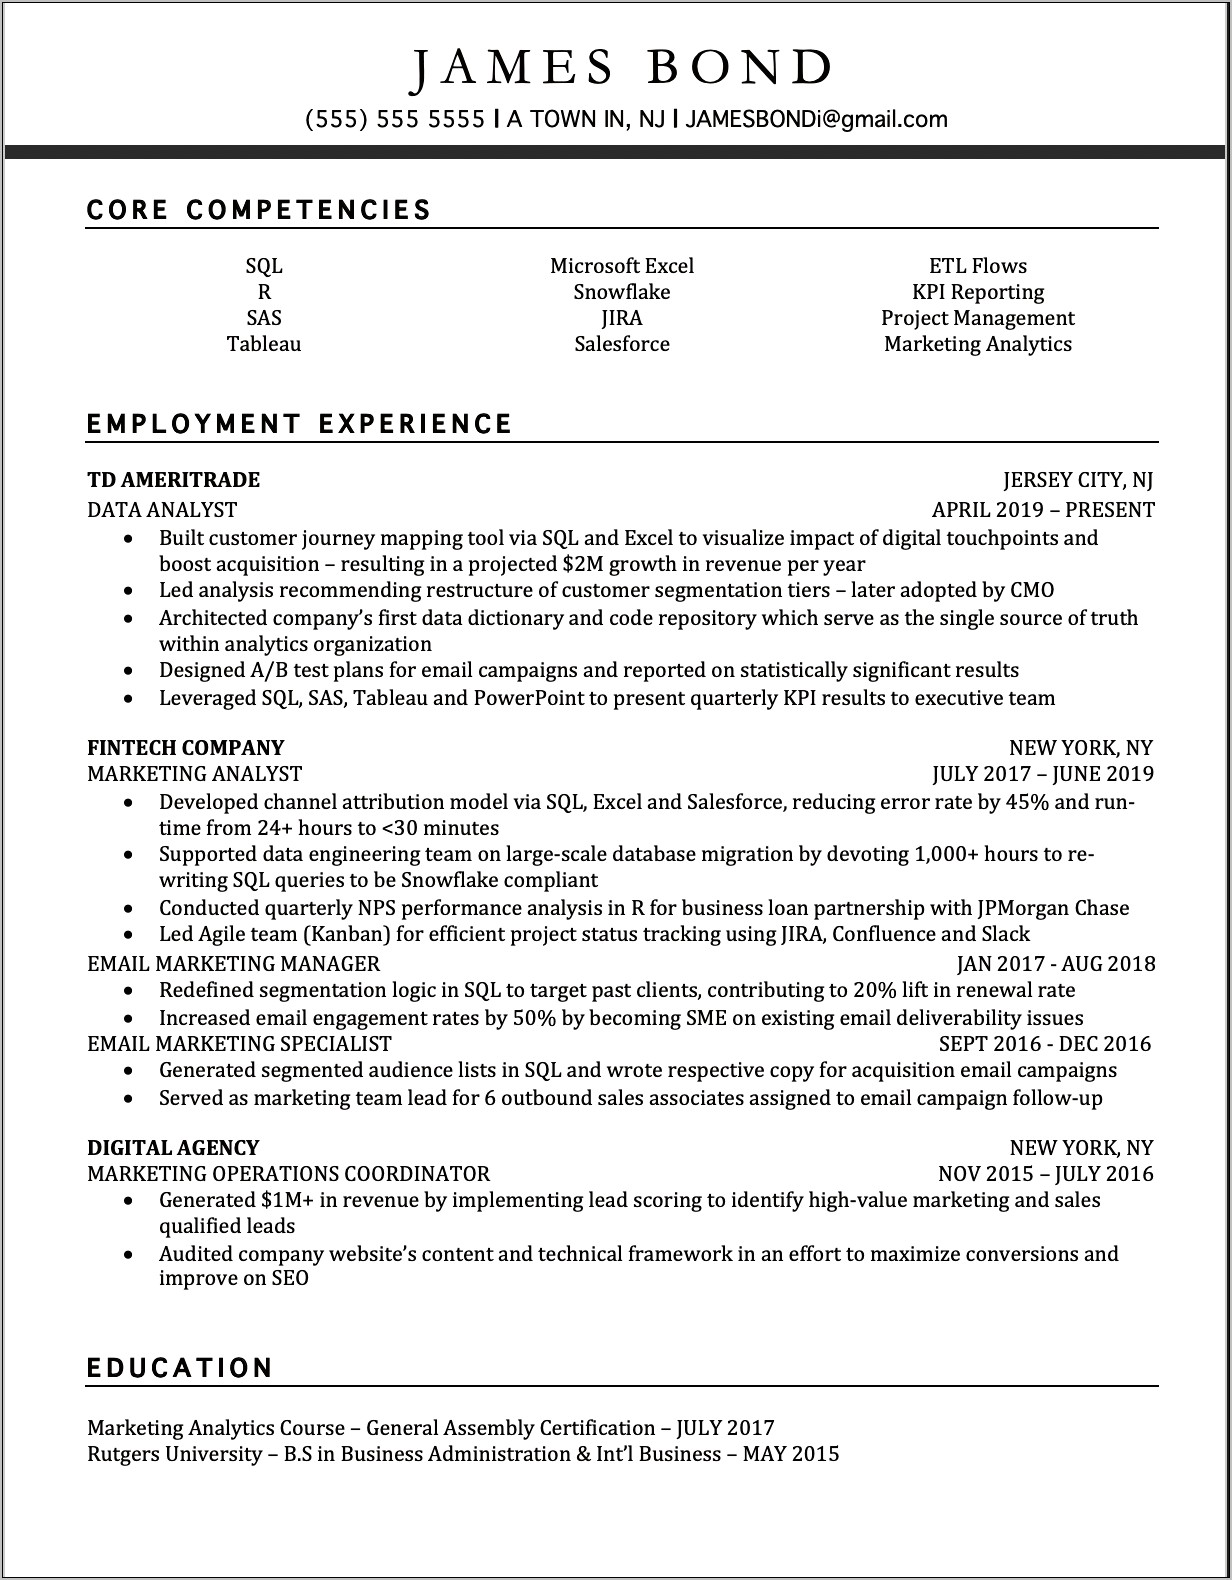 Resume Job With Multiple Titles